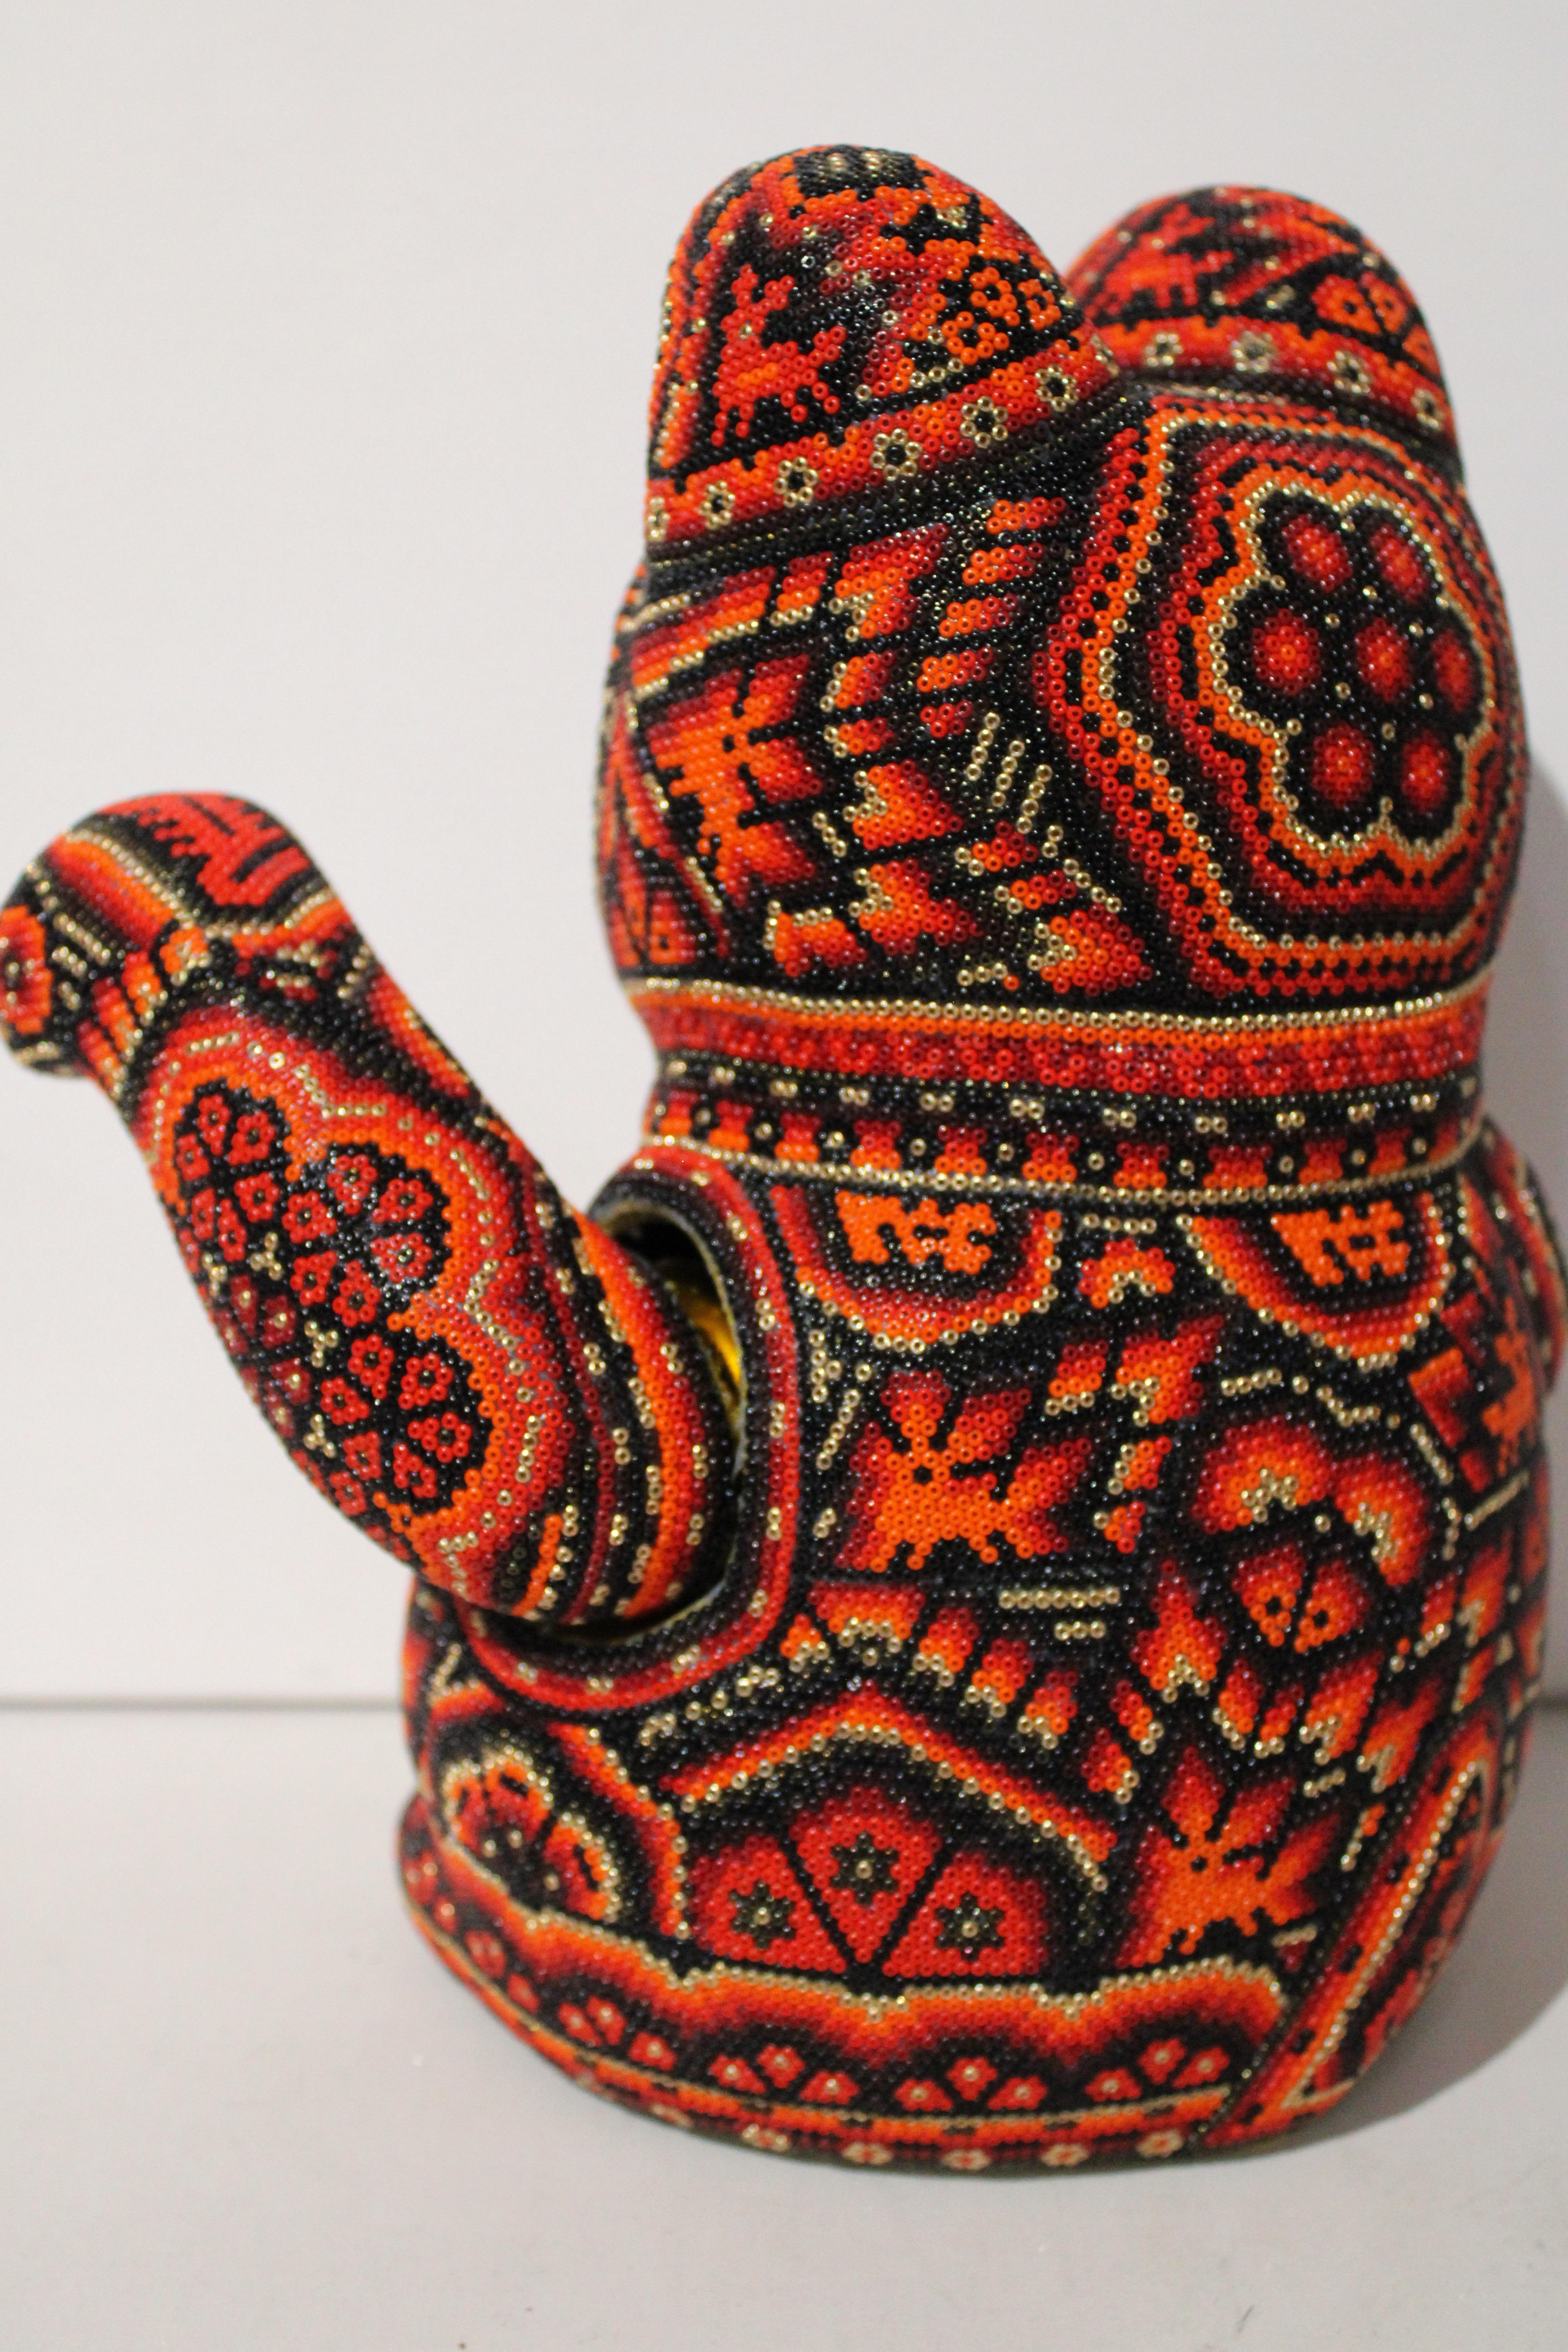 Money Cat from Huichol ALTERATIONS Series 3